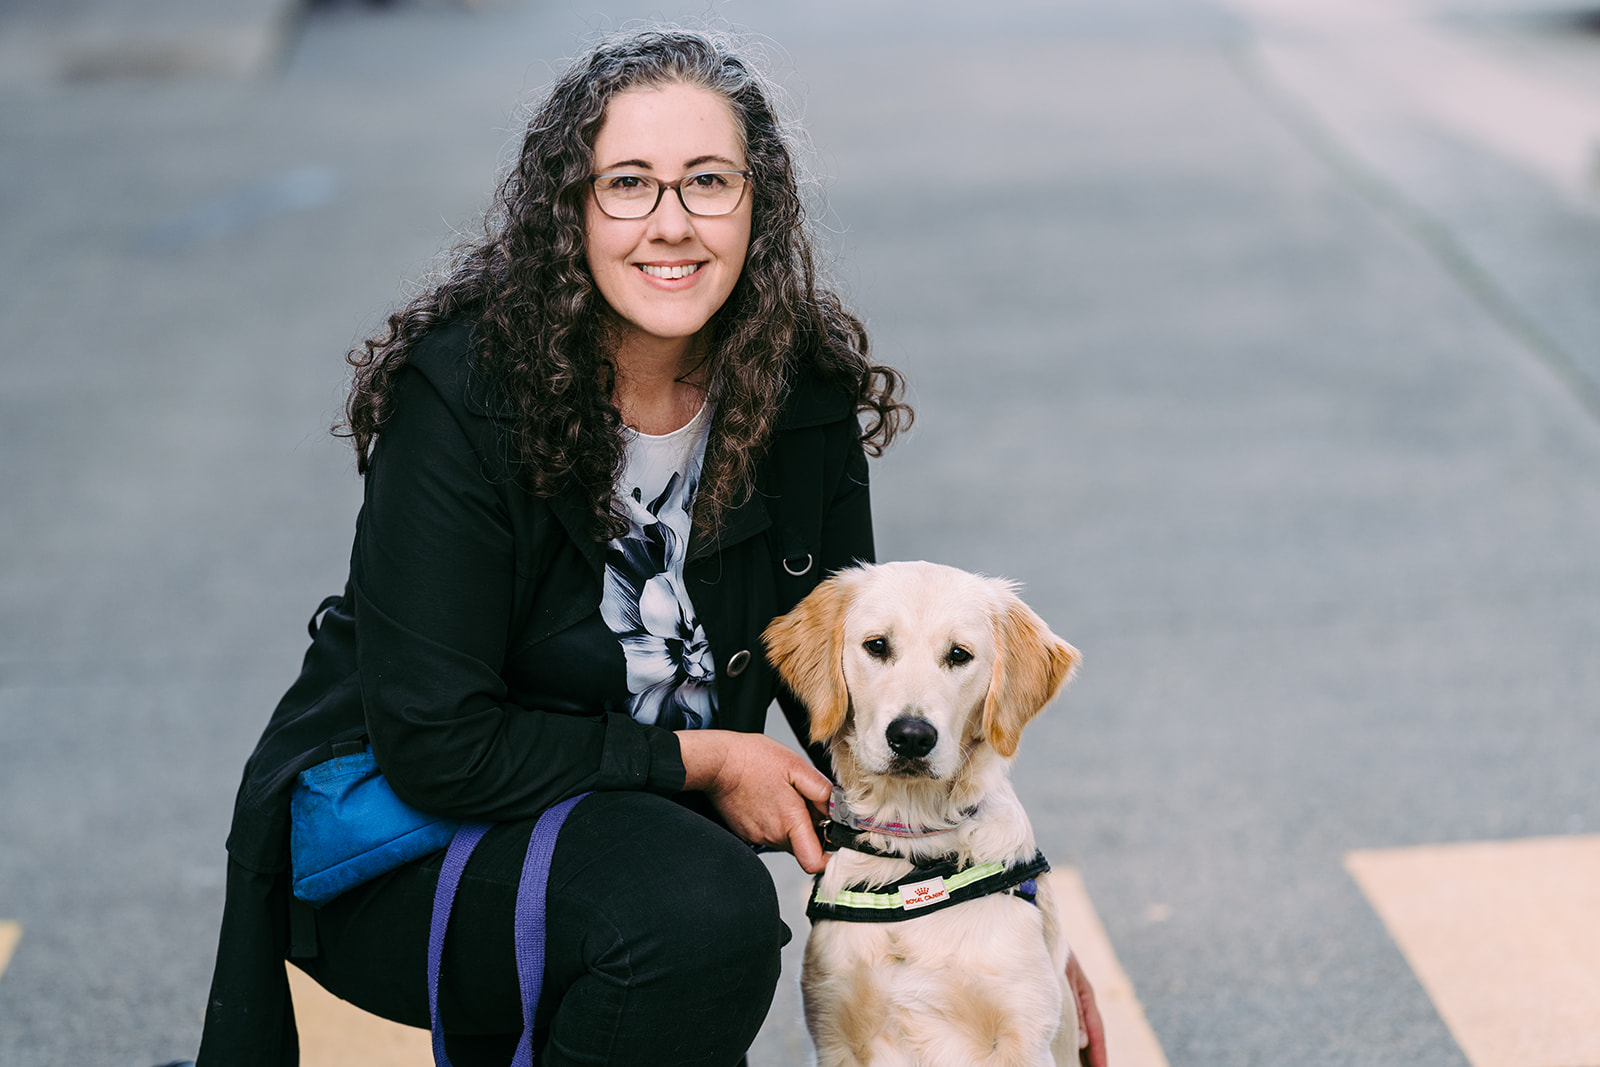 A woman with long dark curly hair and wearing glasses is smiling at the camera. She is crouched beside a Seeing Eye Dogs puppy in harness